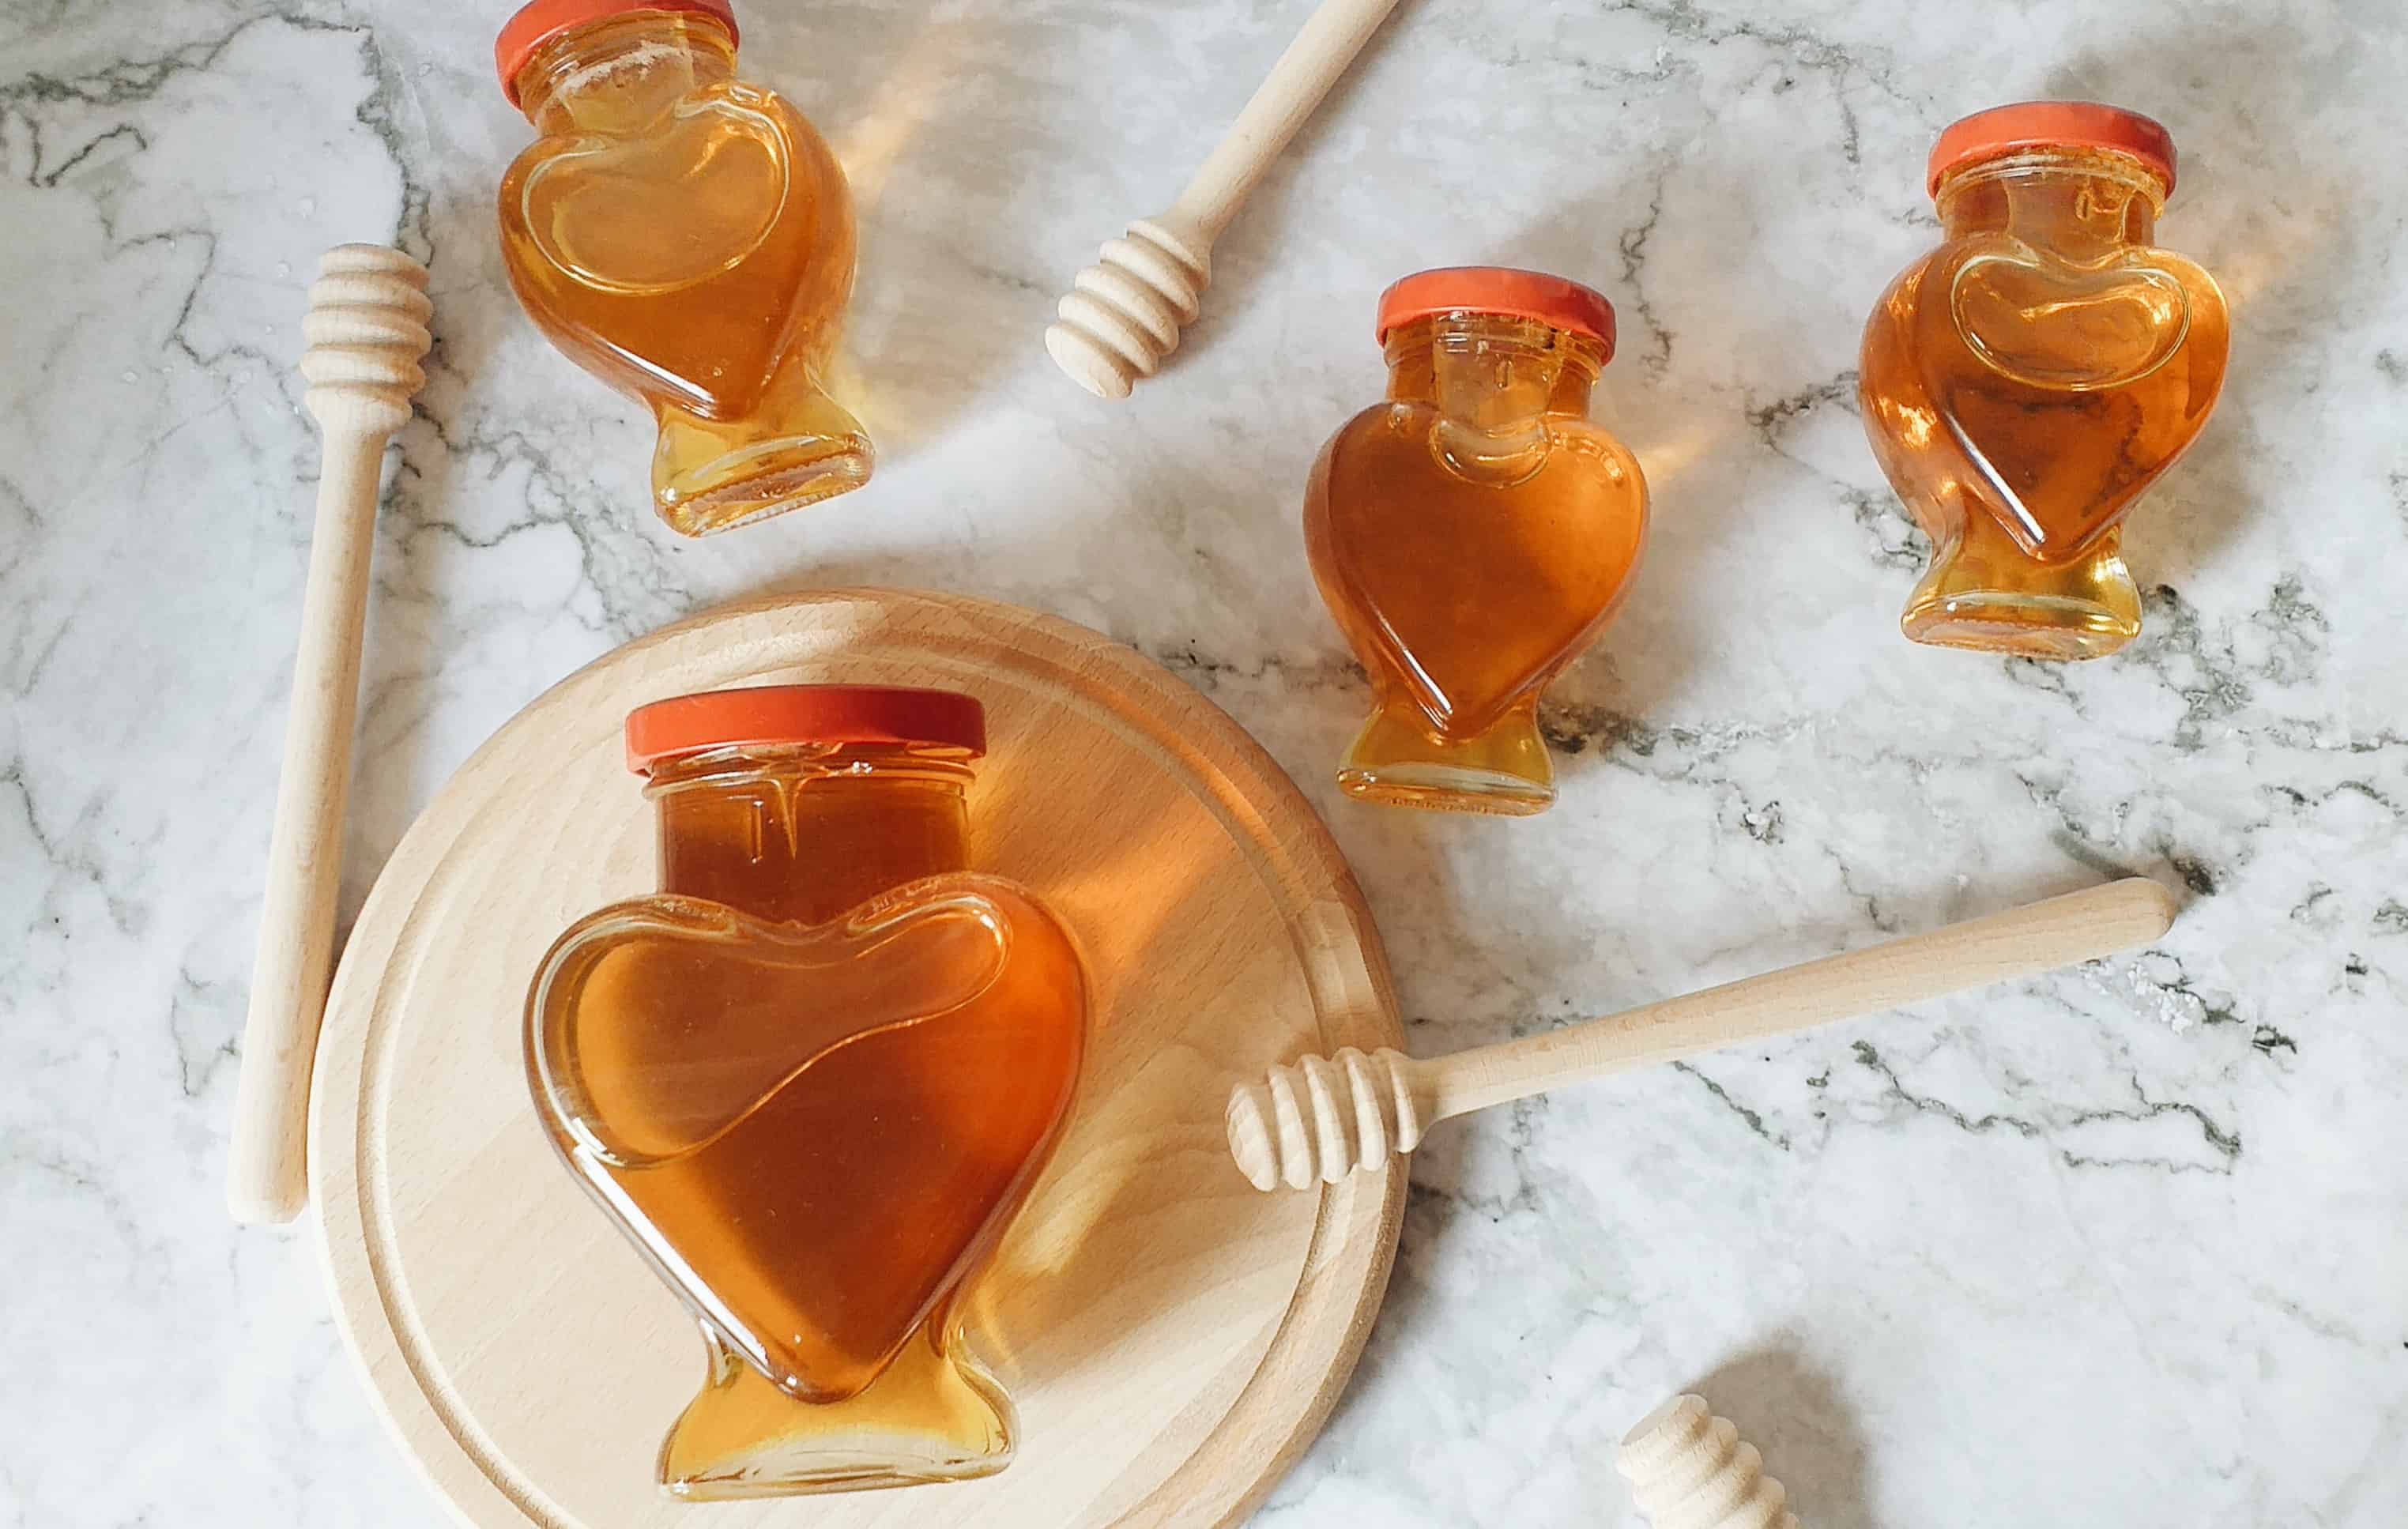 Cruelty free honey on the table